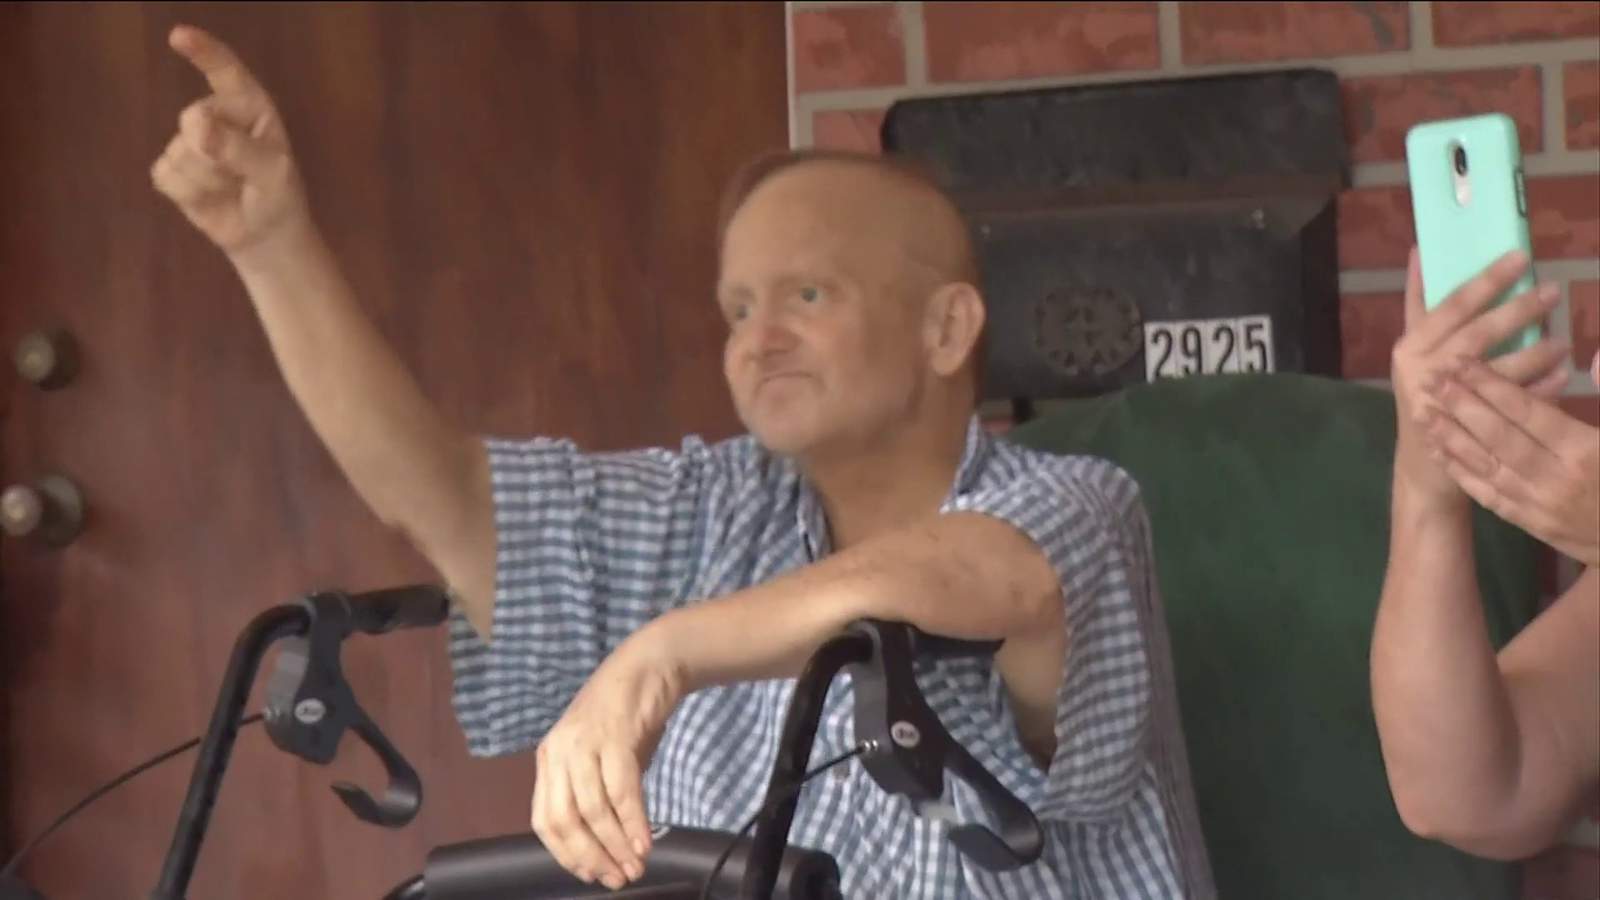 Jacksonville man who is terminally ill gets better turnout than expected for final wish parade